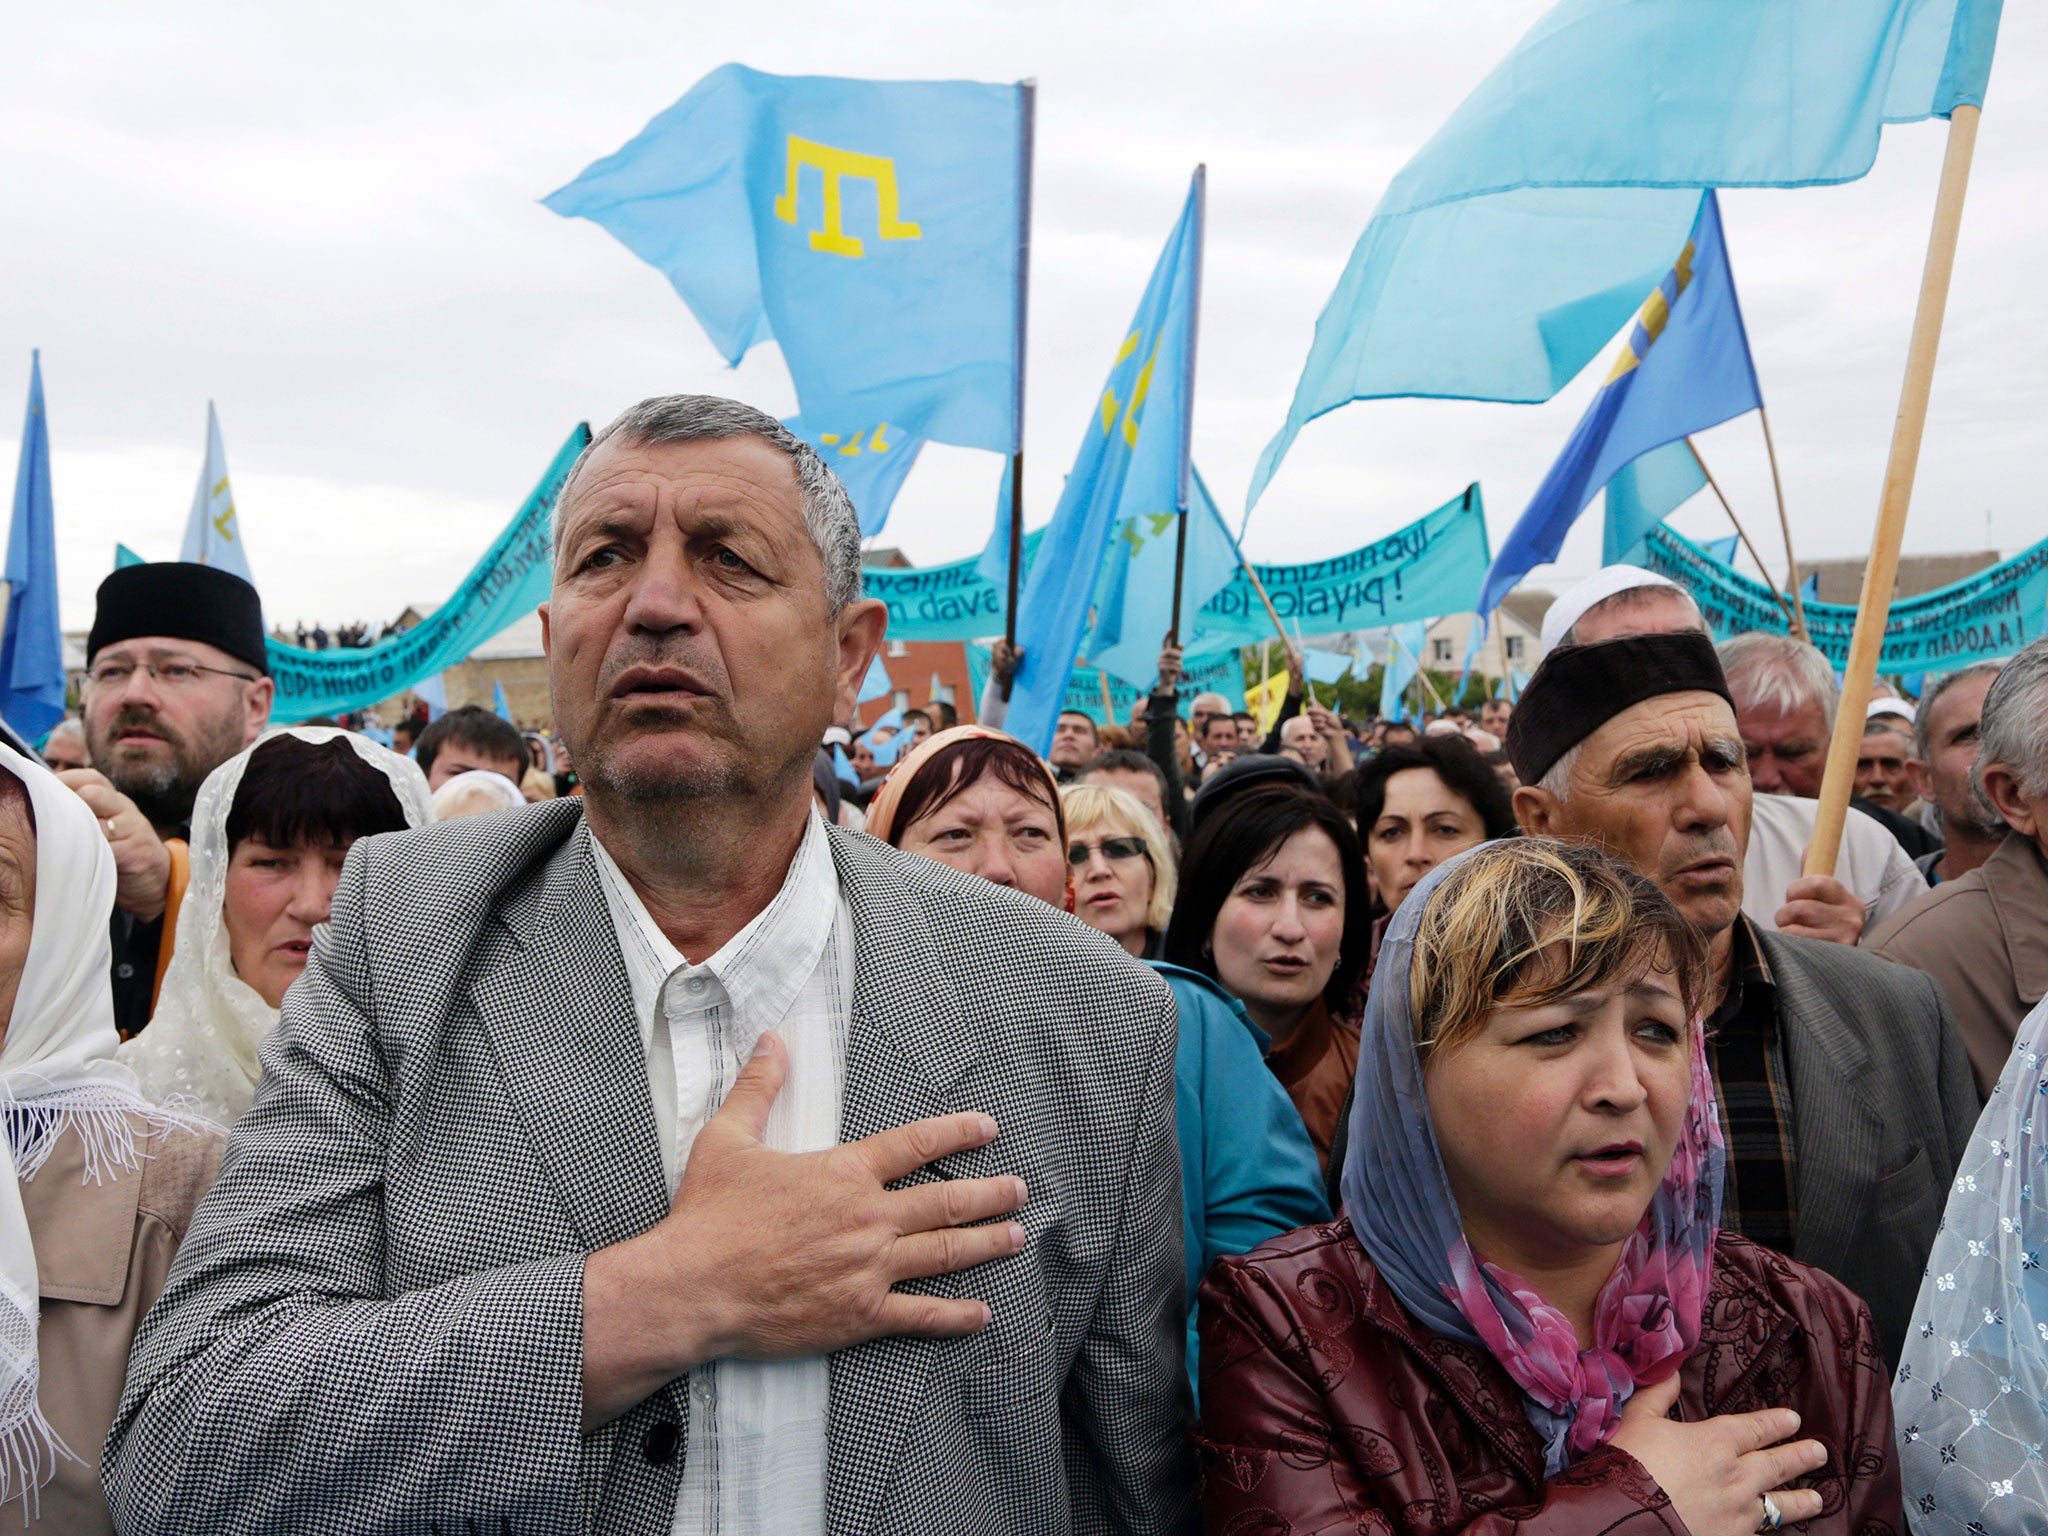 Tatars attend a ceremony in Simferopol in 2014, marking the 70th anniversary of the deportation of Tatars from Crimea